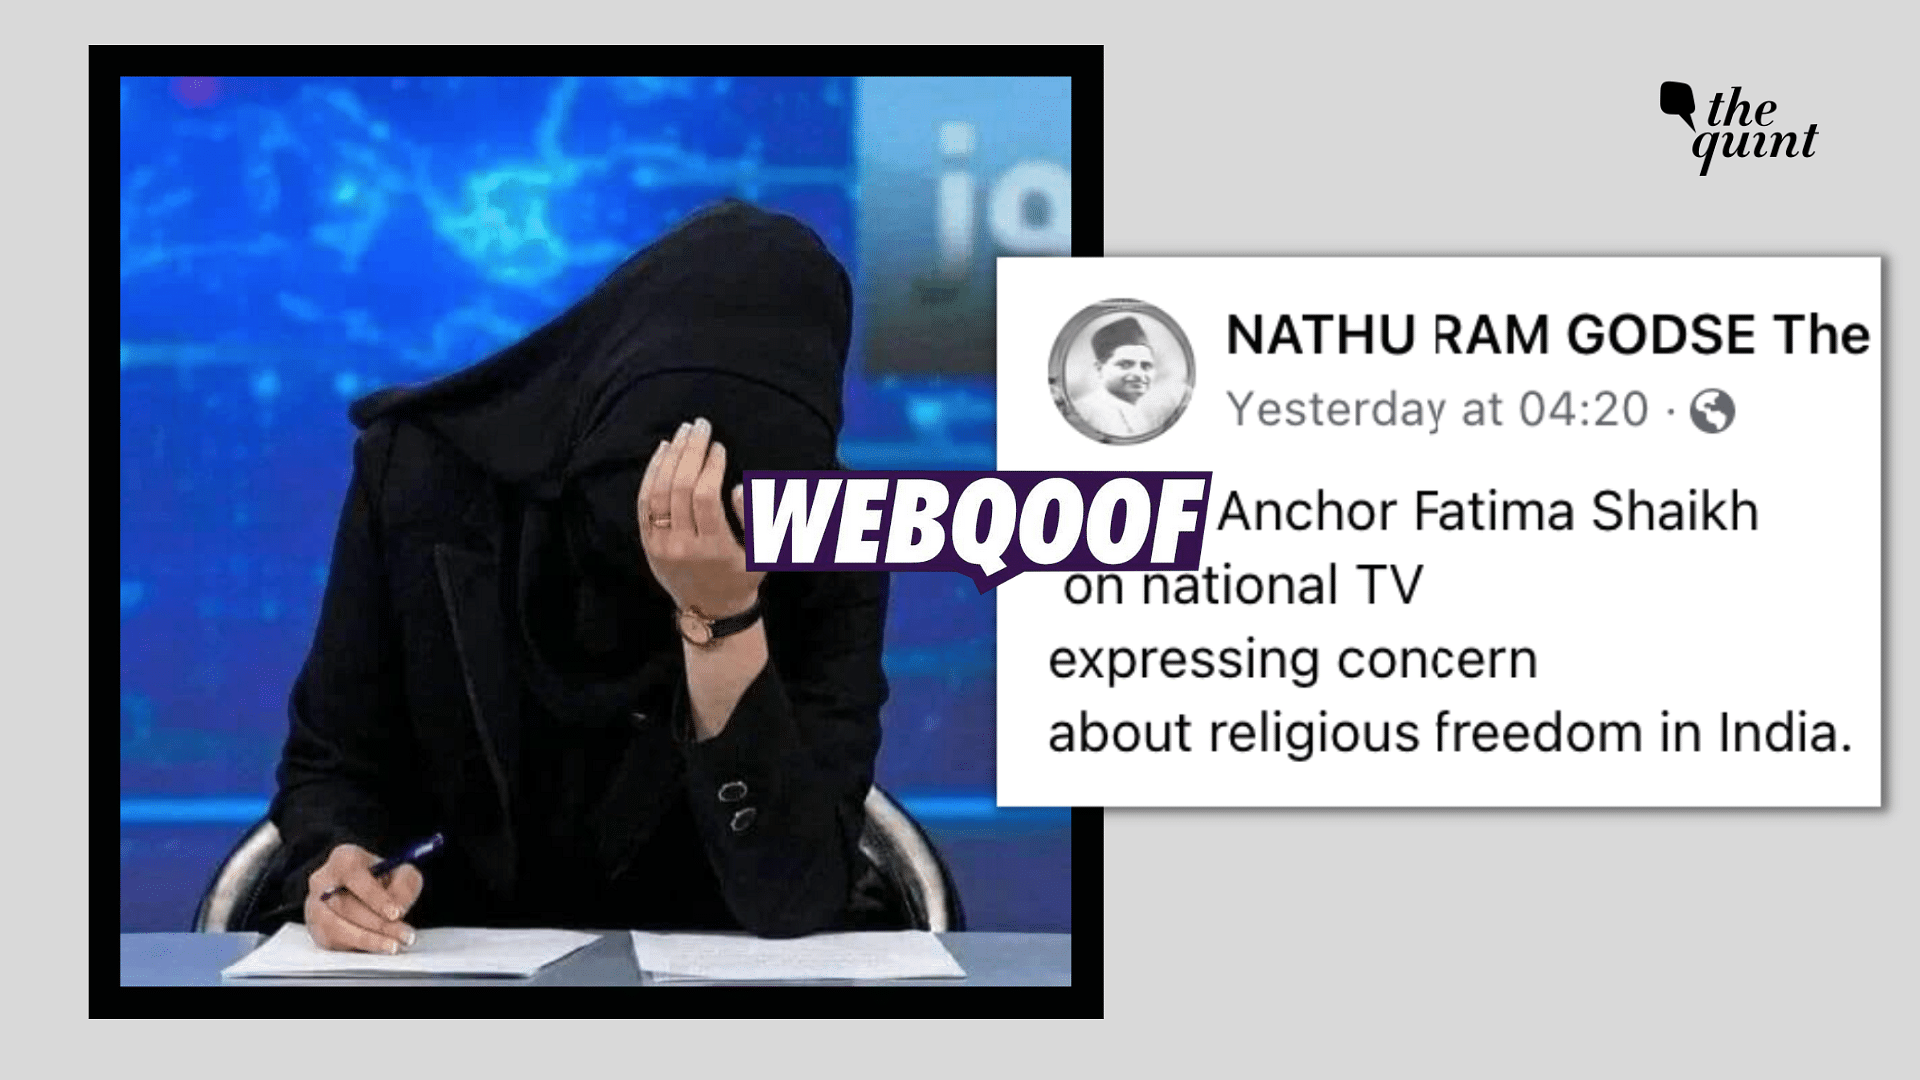 <div class="paragraphs"><p>Fact-Check:&nbsp;The post claims that the image shows a Qatari Anchor speaking about religious freedom in India.</p></div>